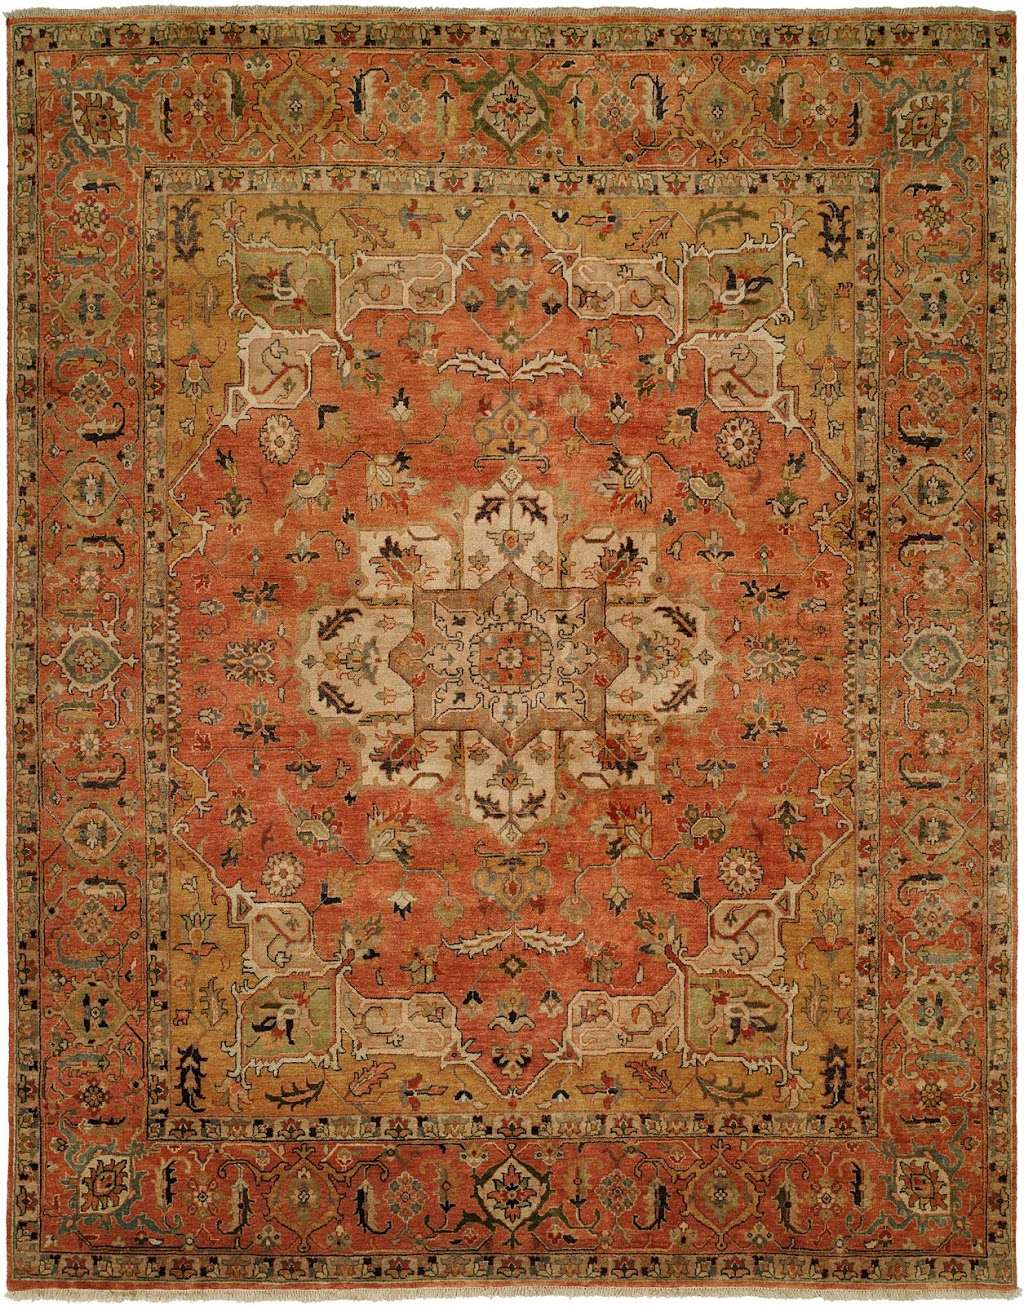 Farsh Oriental Rugs | 166 King St. Rt. 3A, Cohasset, MA 02025 | Phone: (781) 383-1500